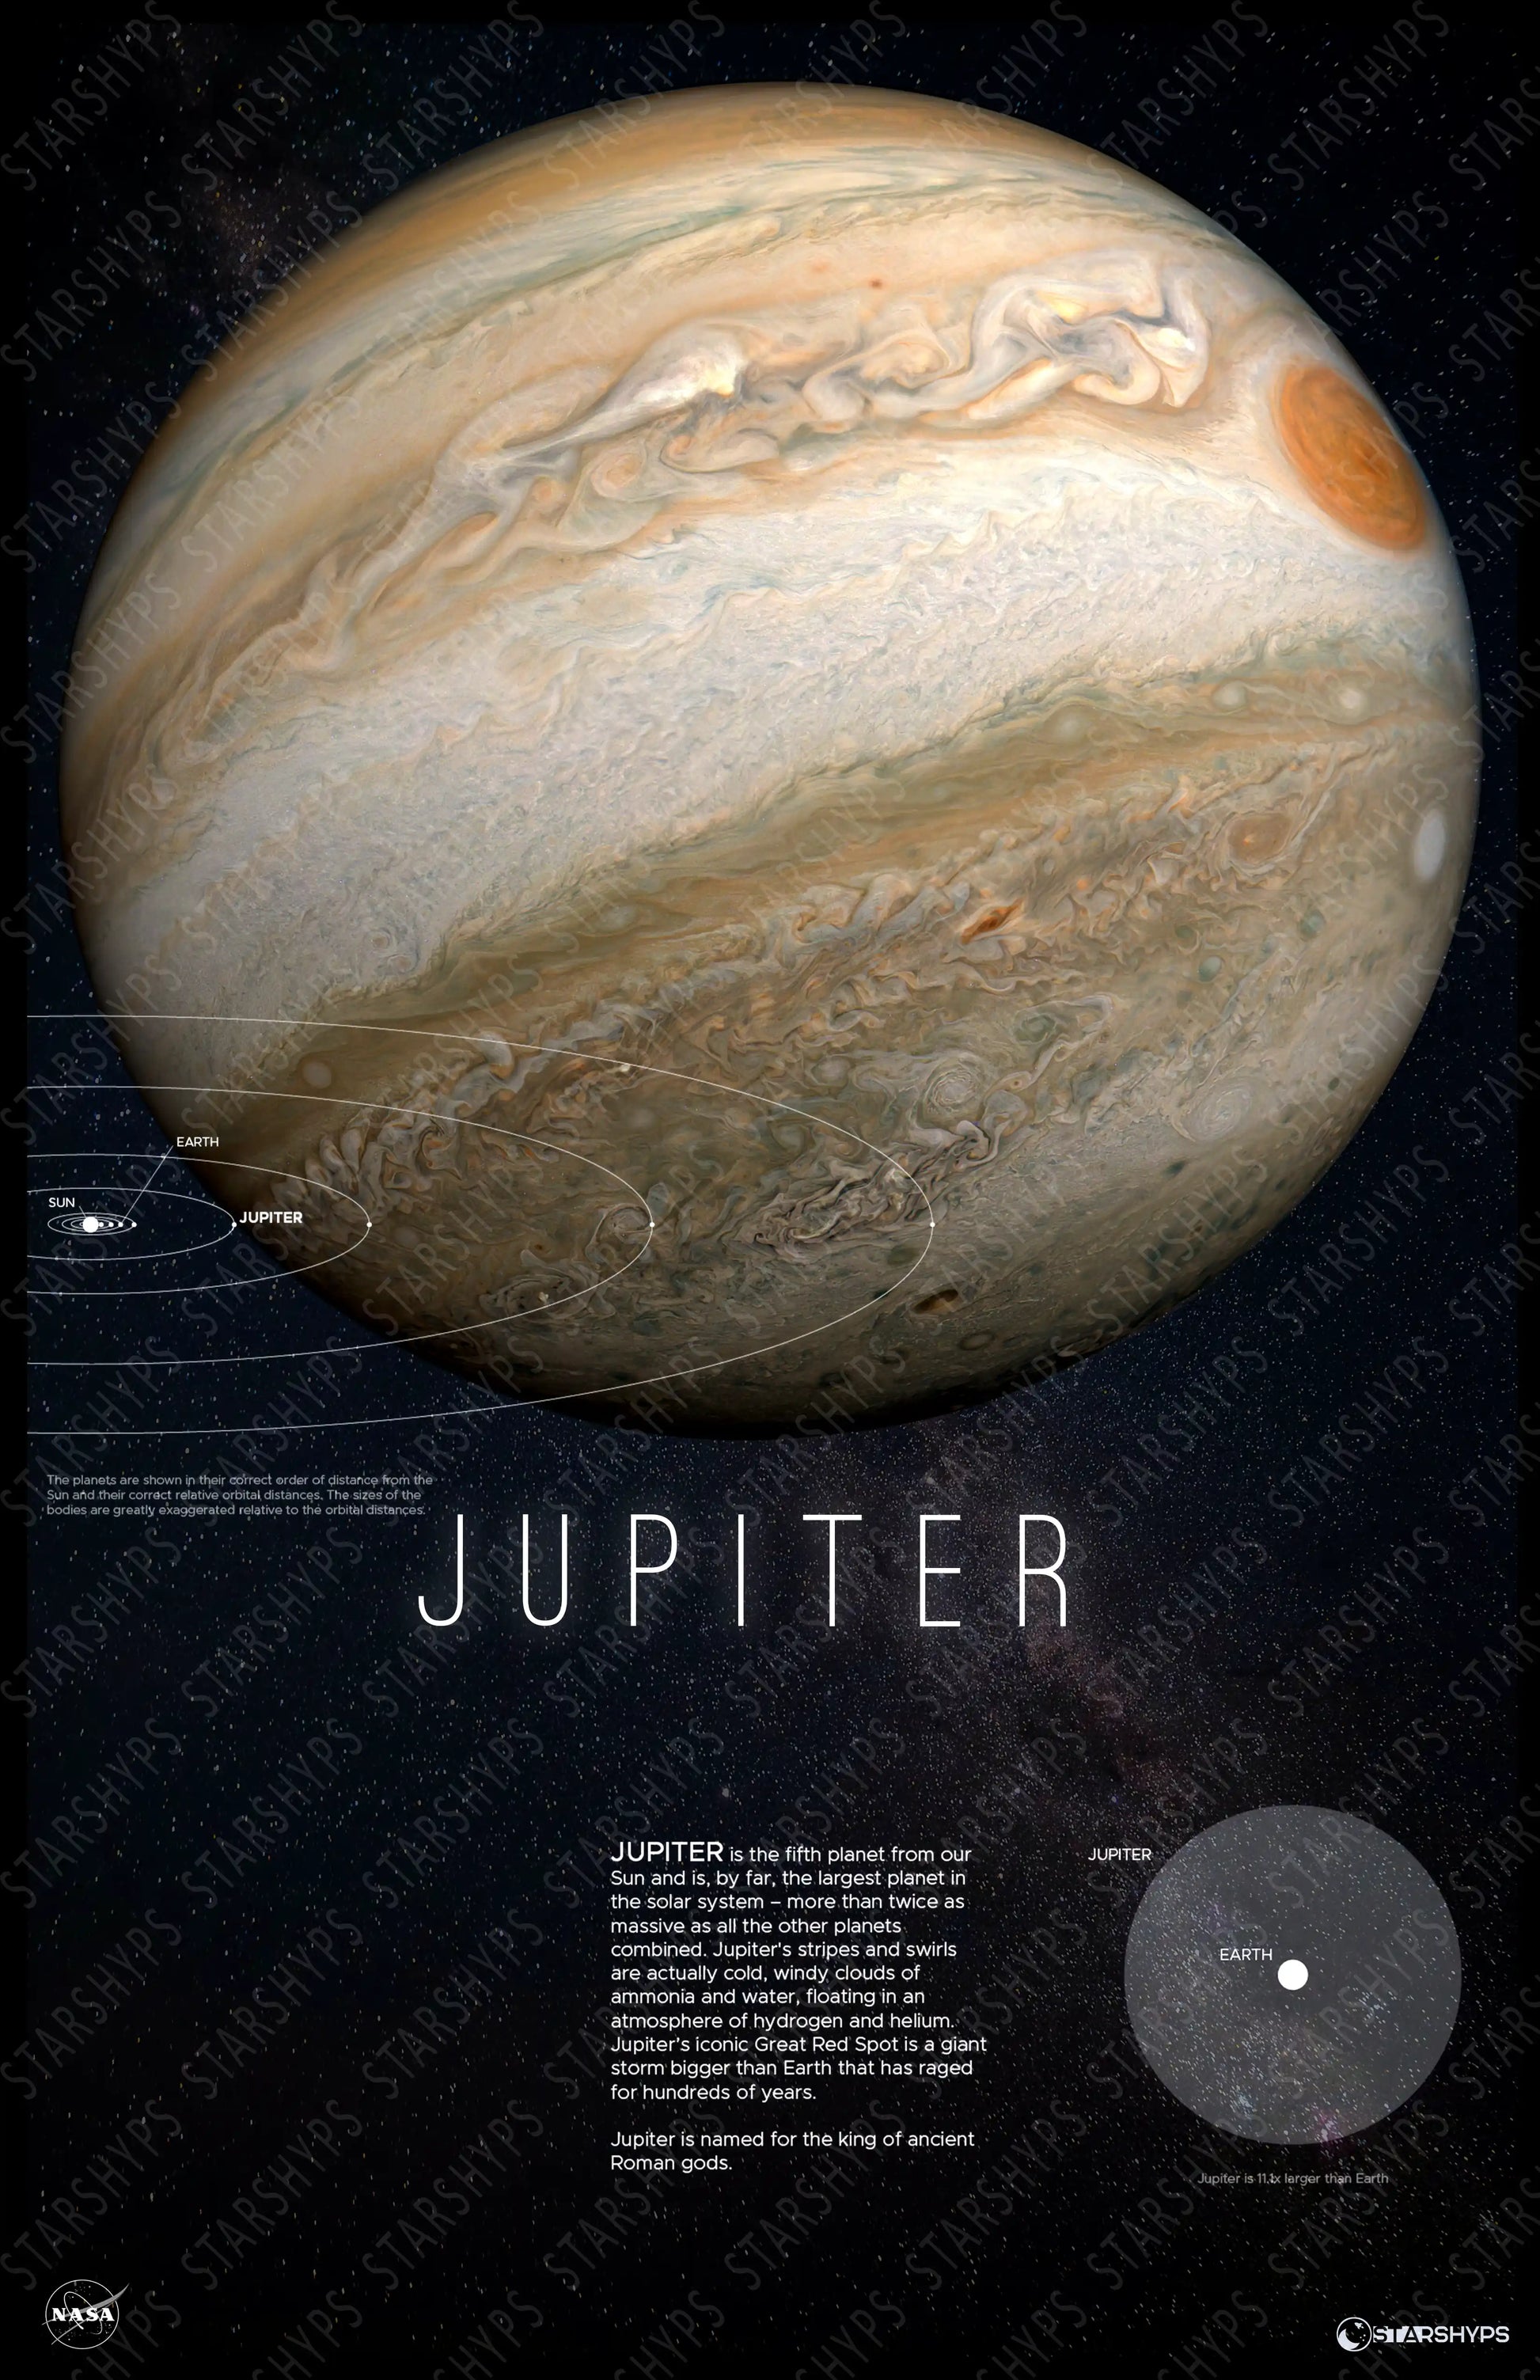 Jupiter Jovian Splendor Print | Jupiter Decor | Rocket Blueprint Posters | The image shows a framed Jupiter poster on a dark wall. The poster includes a high-resolution image of Jupiter, the title "JUPITER," informative text, and a size comparison chart with Earth. The Starshyps watermark is present, with a starry sky as the backdrop.